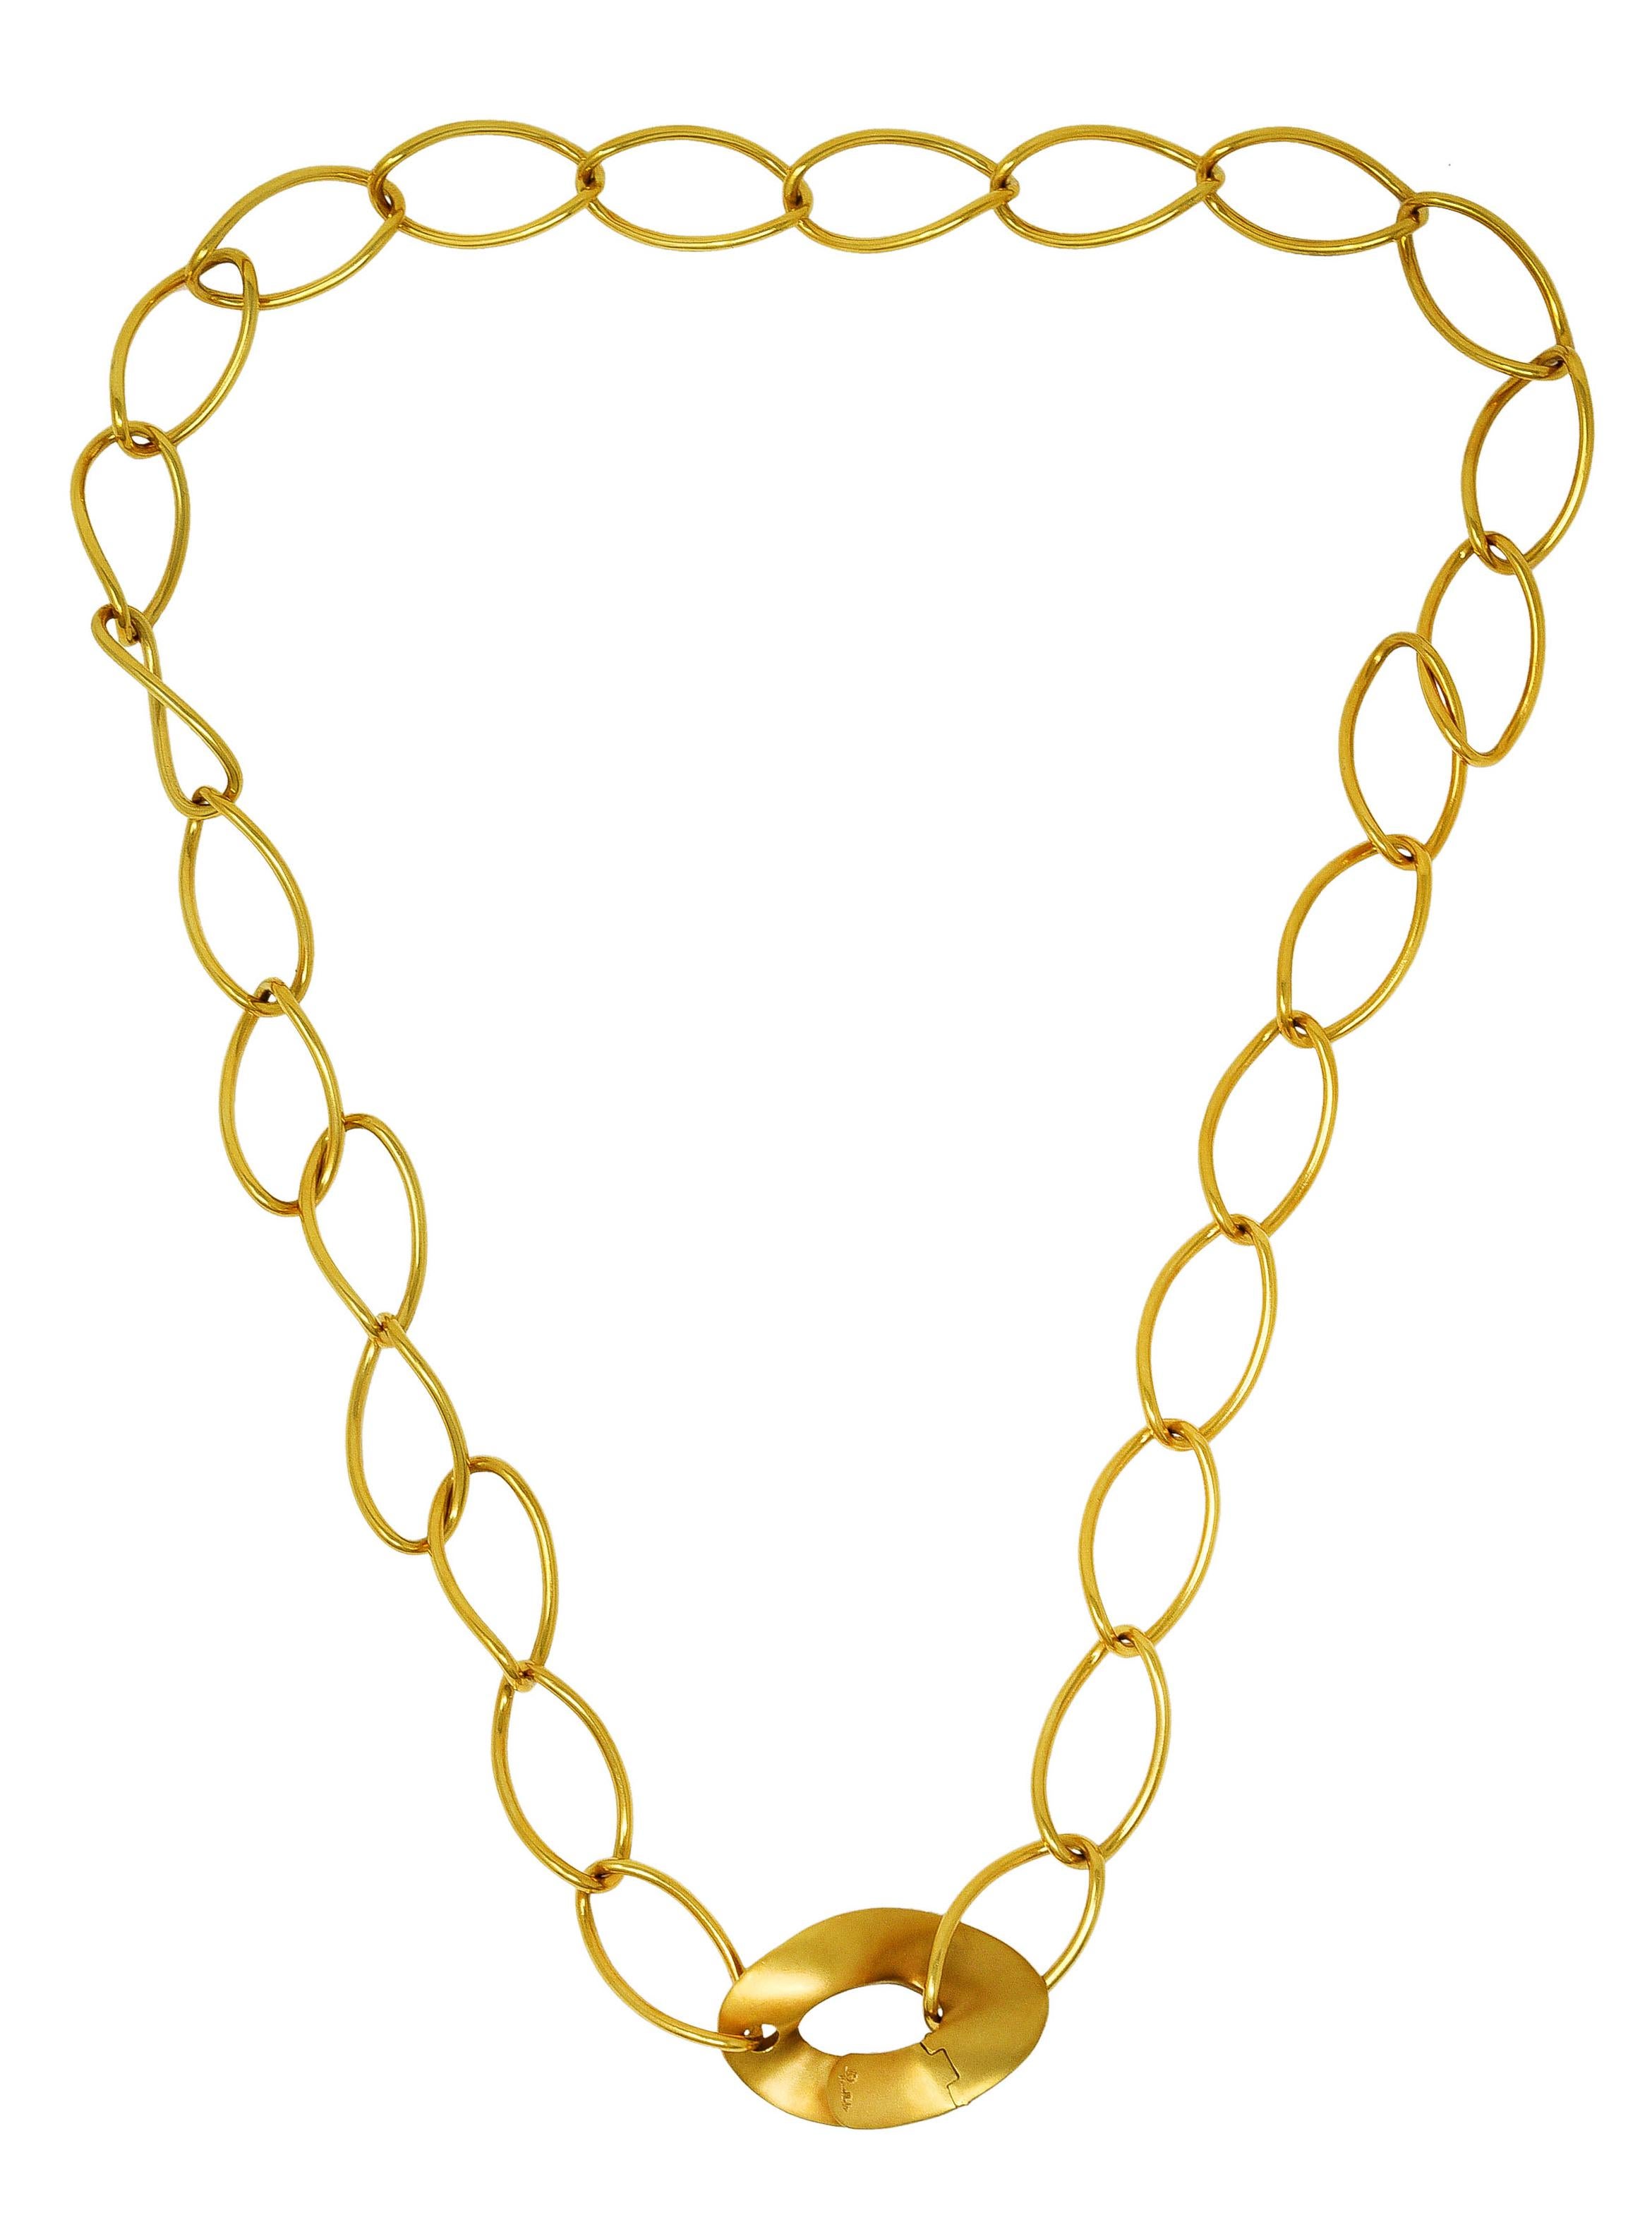 Pomellato Contemporary 18 Karat Yellow Gold Twisted Link Chain Necklace 6